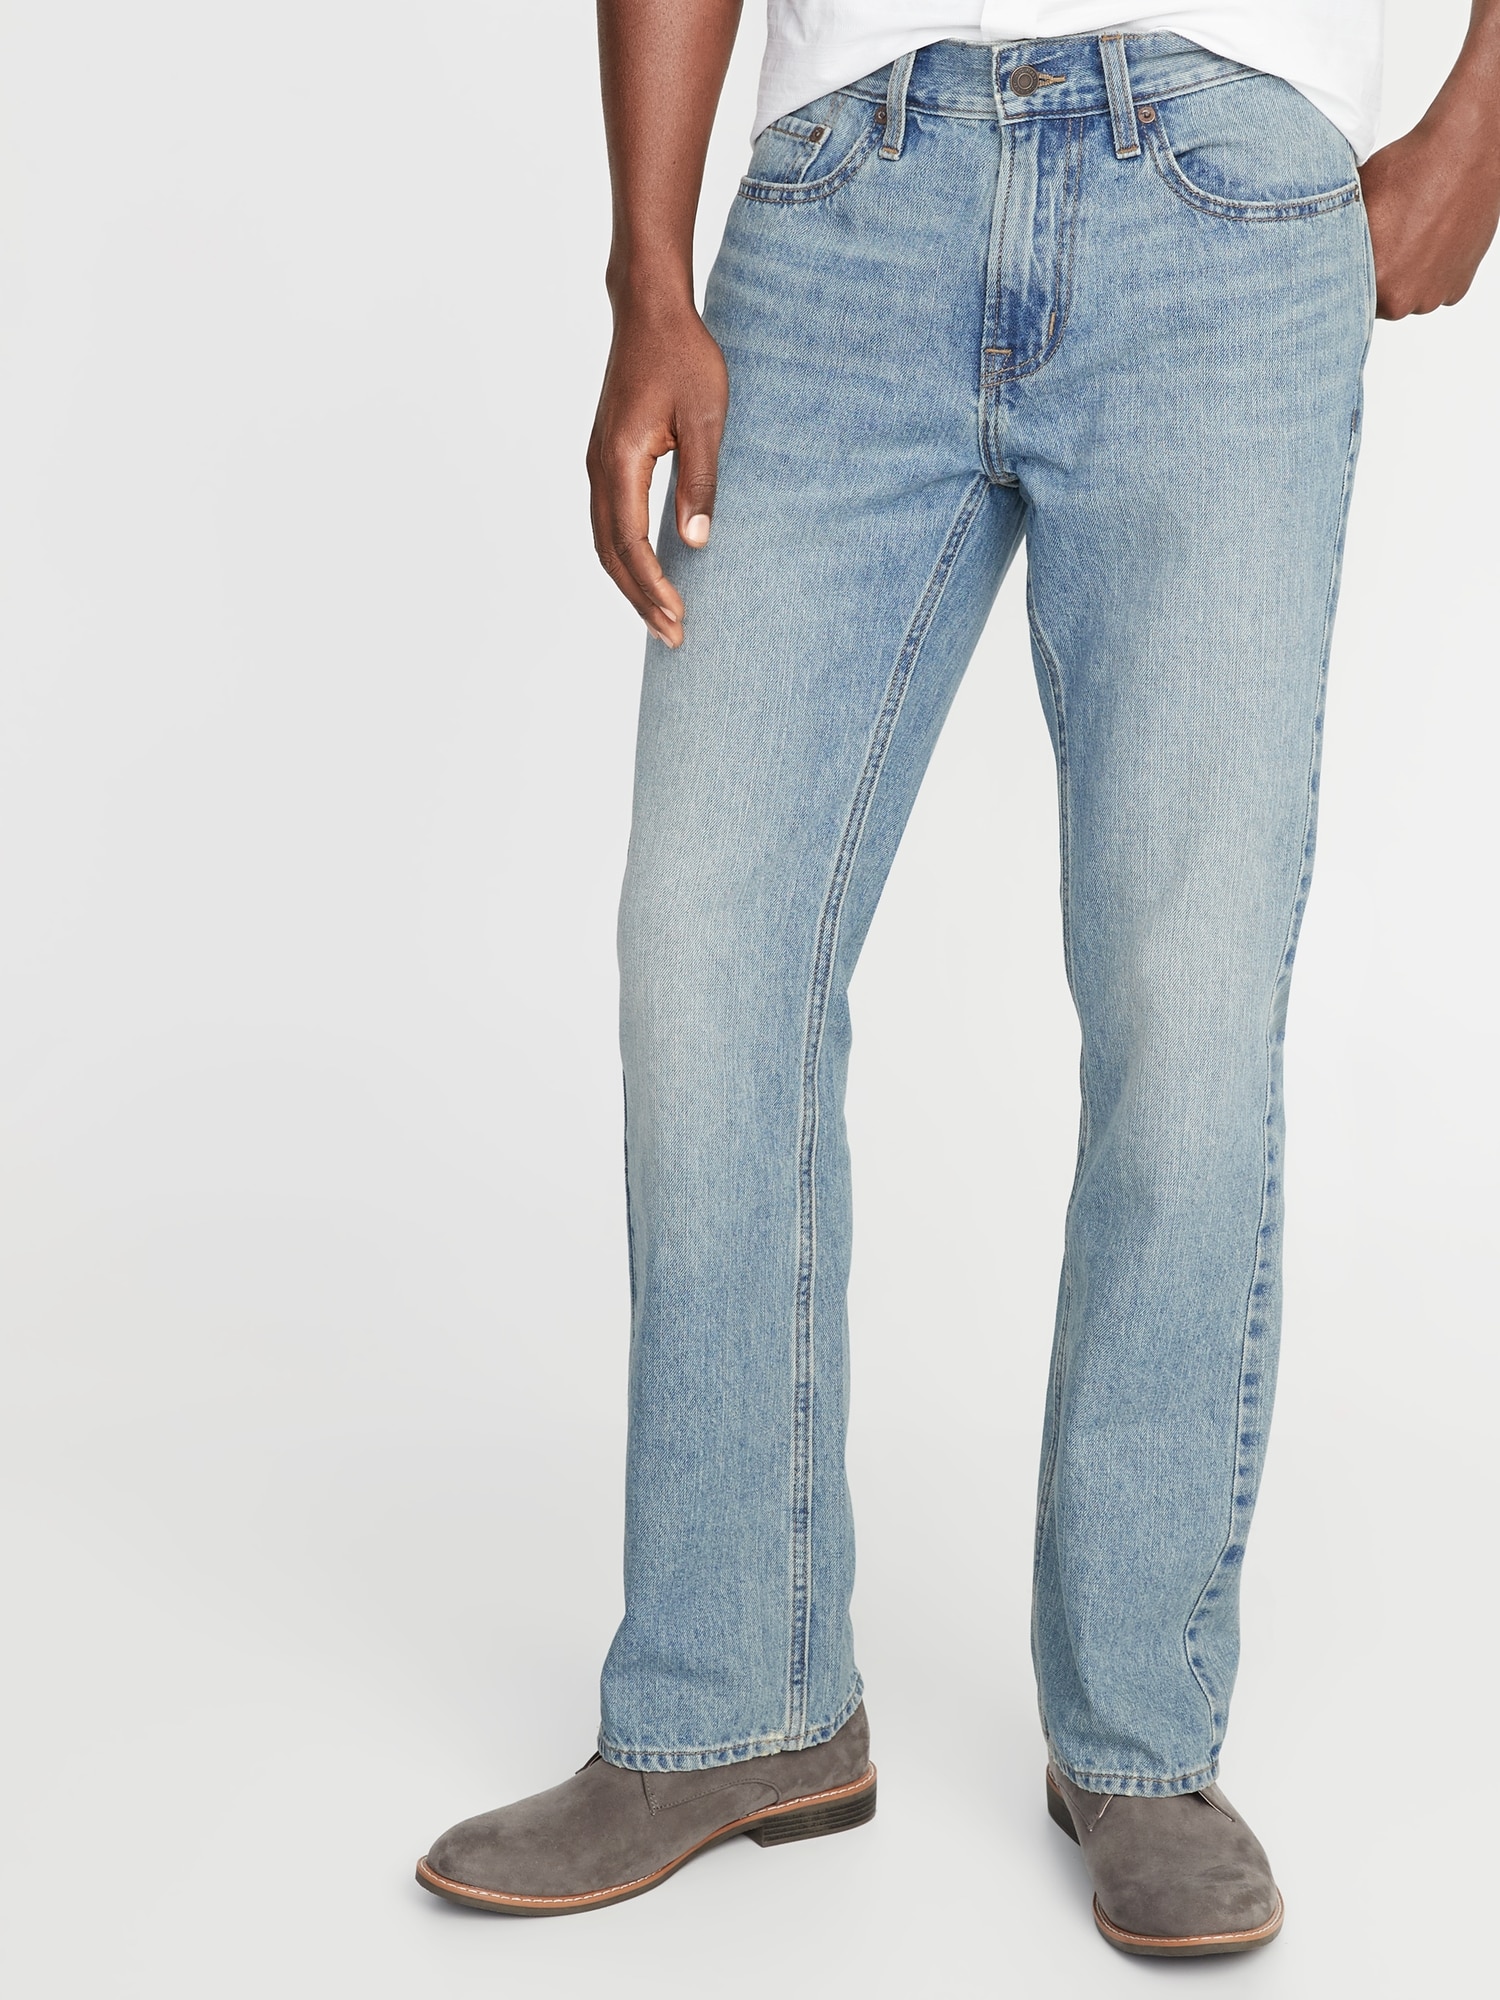 mens bootcut jeans old navy